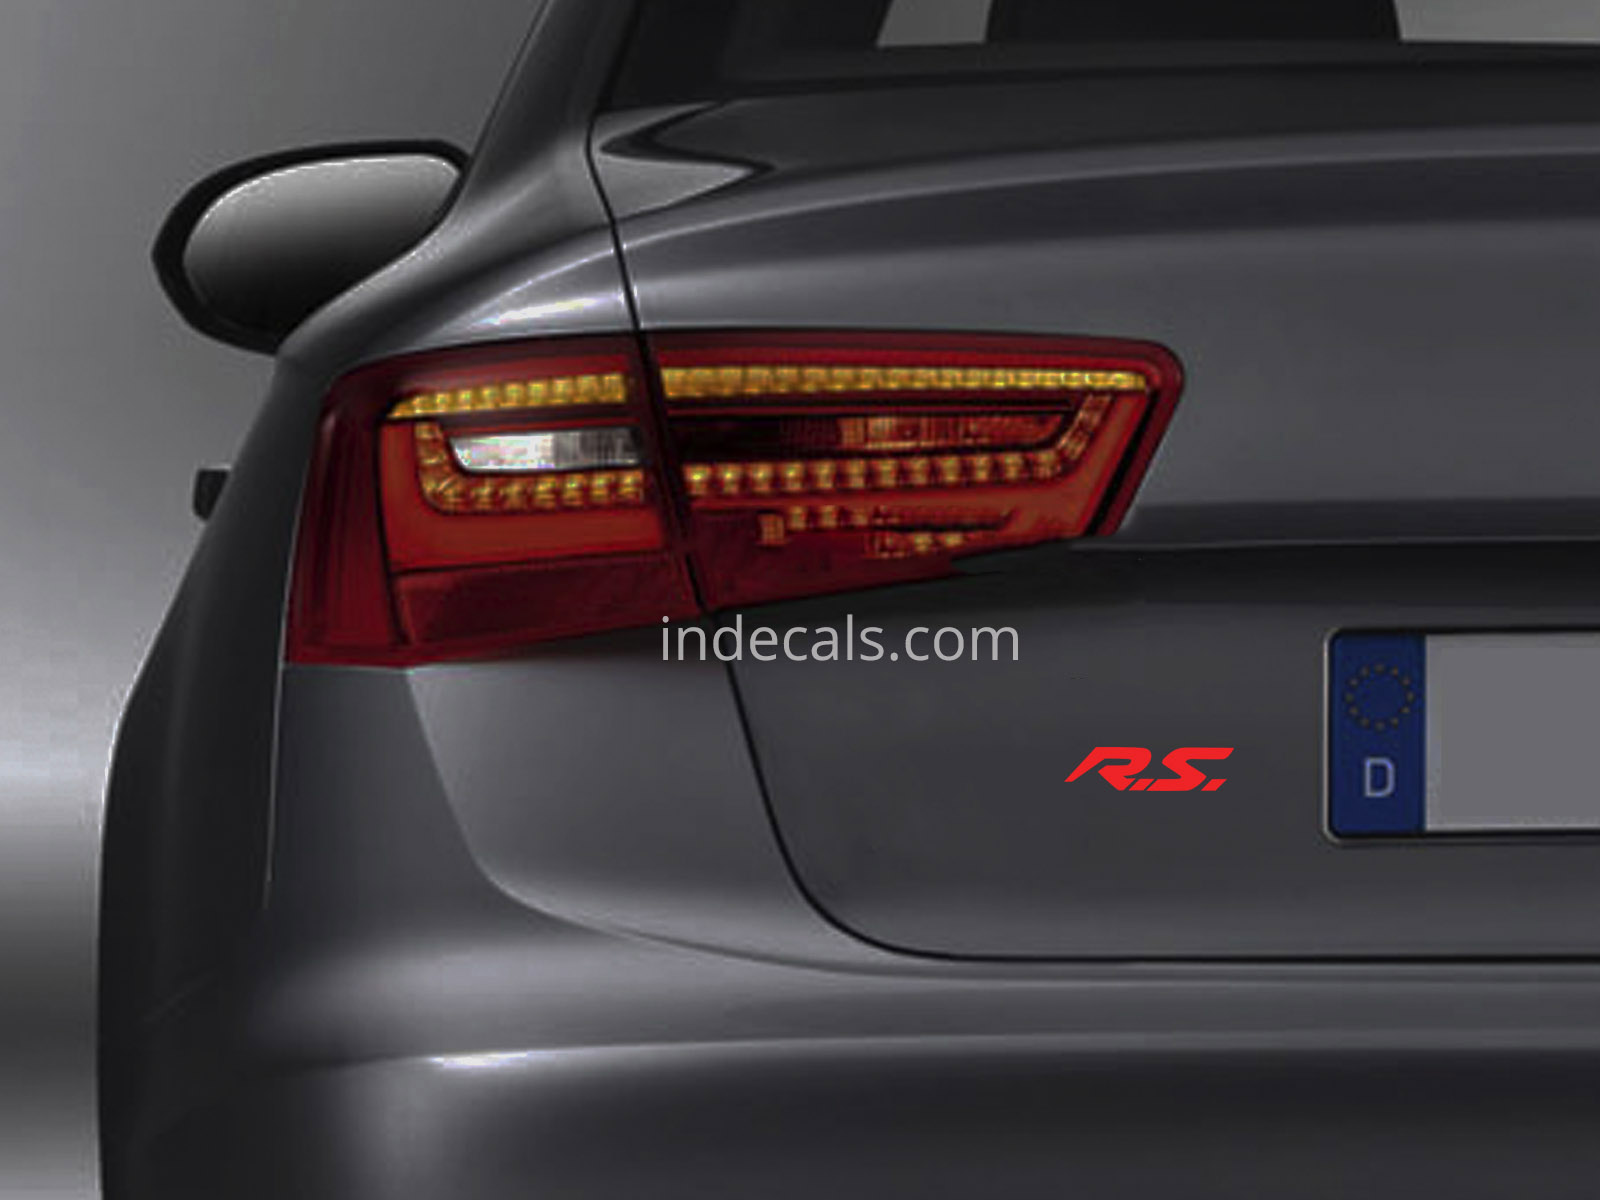 3 x Renault RS Stickers for Trunk - Red